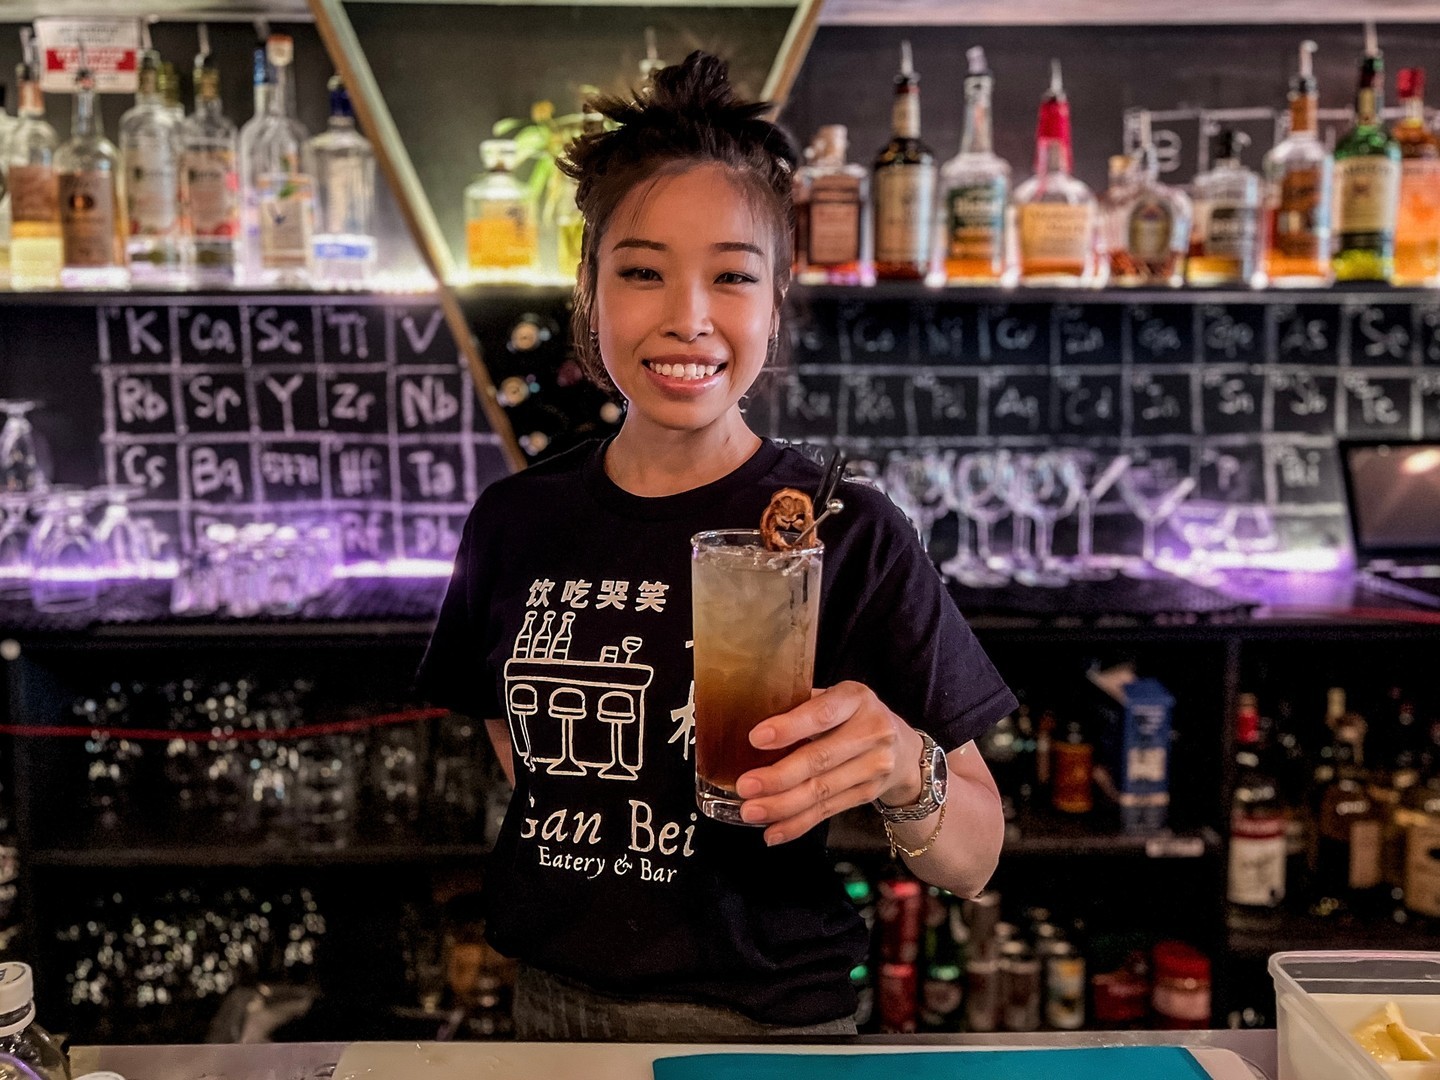 Cocktails x Comfort food x Chinatown-International District🍹⁠
⁠
July 27 @ 6 PM - Join us, Gan Bei owner Yen Ma & @ourseatoday at @ganbeiseattle to celebrate Drink Up Week!⁠
⁠
Gan Bei debuted in 2018 when Yen and her family transitioned their cafe to become a neighborhood bar and eatery. ⁠
⁠
From July 25-31, enjoy the Drink Up Seattle featured beverage Mandarin Breeze, made with fresh mandarins, orange peel black tea, ketel one grapefruit rose vodka, a touch of honey, and soda water. ⁠
⁠
Bonus: $1 from each Mandarin Breeze sold will be donated to a local food bank.⁠
⁠
#BeIntentional #SpendLikeItMatters #DrinkUpSeattle